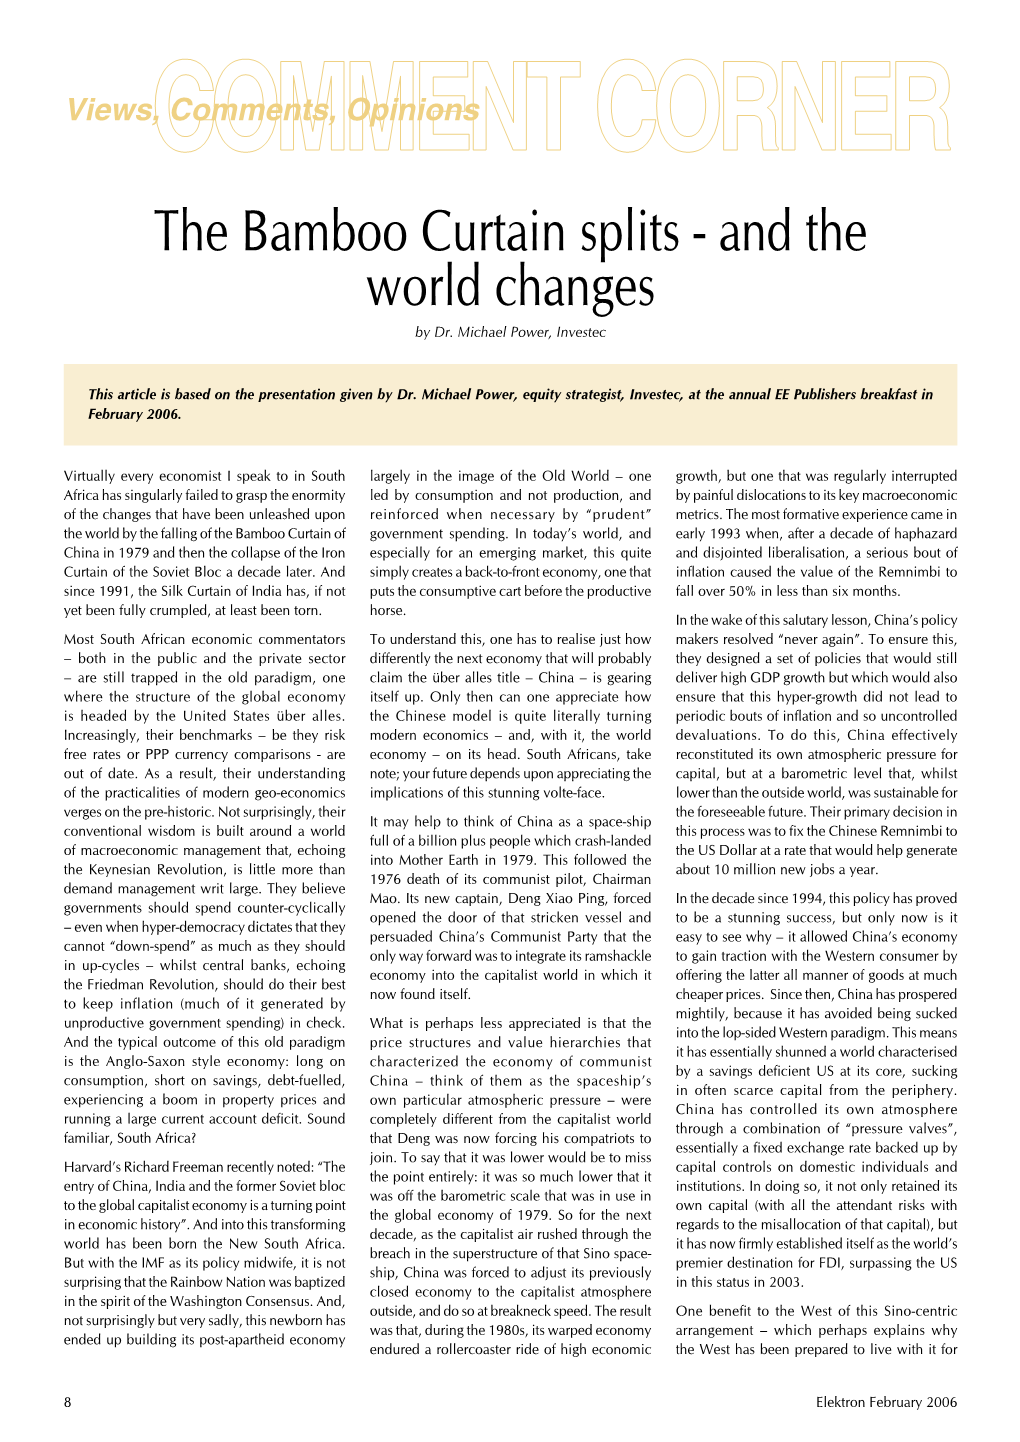 The Bamboo Curtain Splits - and the World Changes by Dr